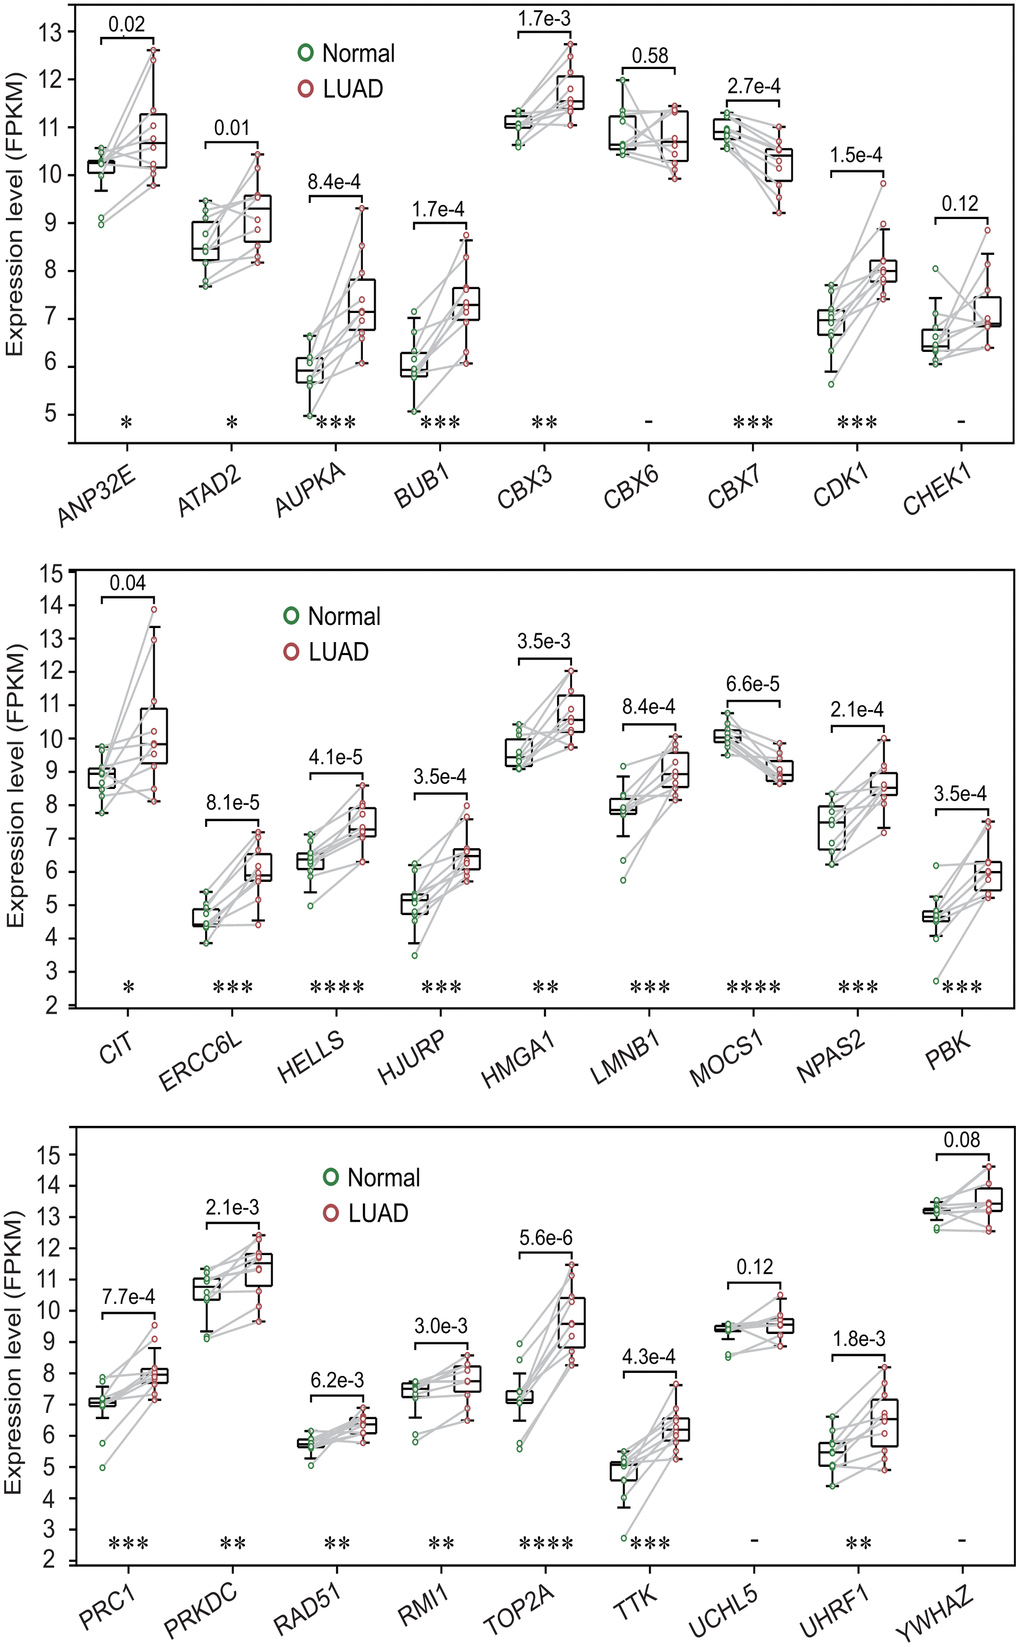 Expression levels of 27 prognostic chromatin regulators between lung adenocarcinoma (LUAD) and normal lung tissues. The expression levels of 27 prognostic chromatin regulators were compared between LUAD and normal lung tissues by a paired t-test method using 10 pairs of samples from 10 LUAD patients. The result was highly consistent with the TCGA-LUAD result.